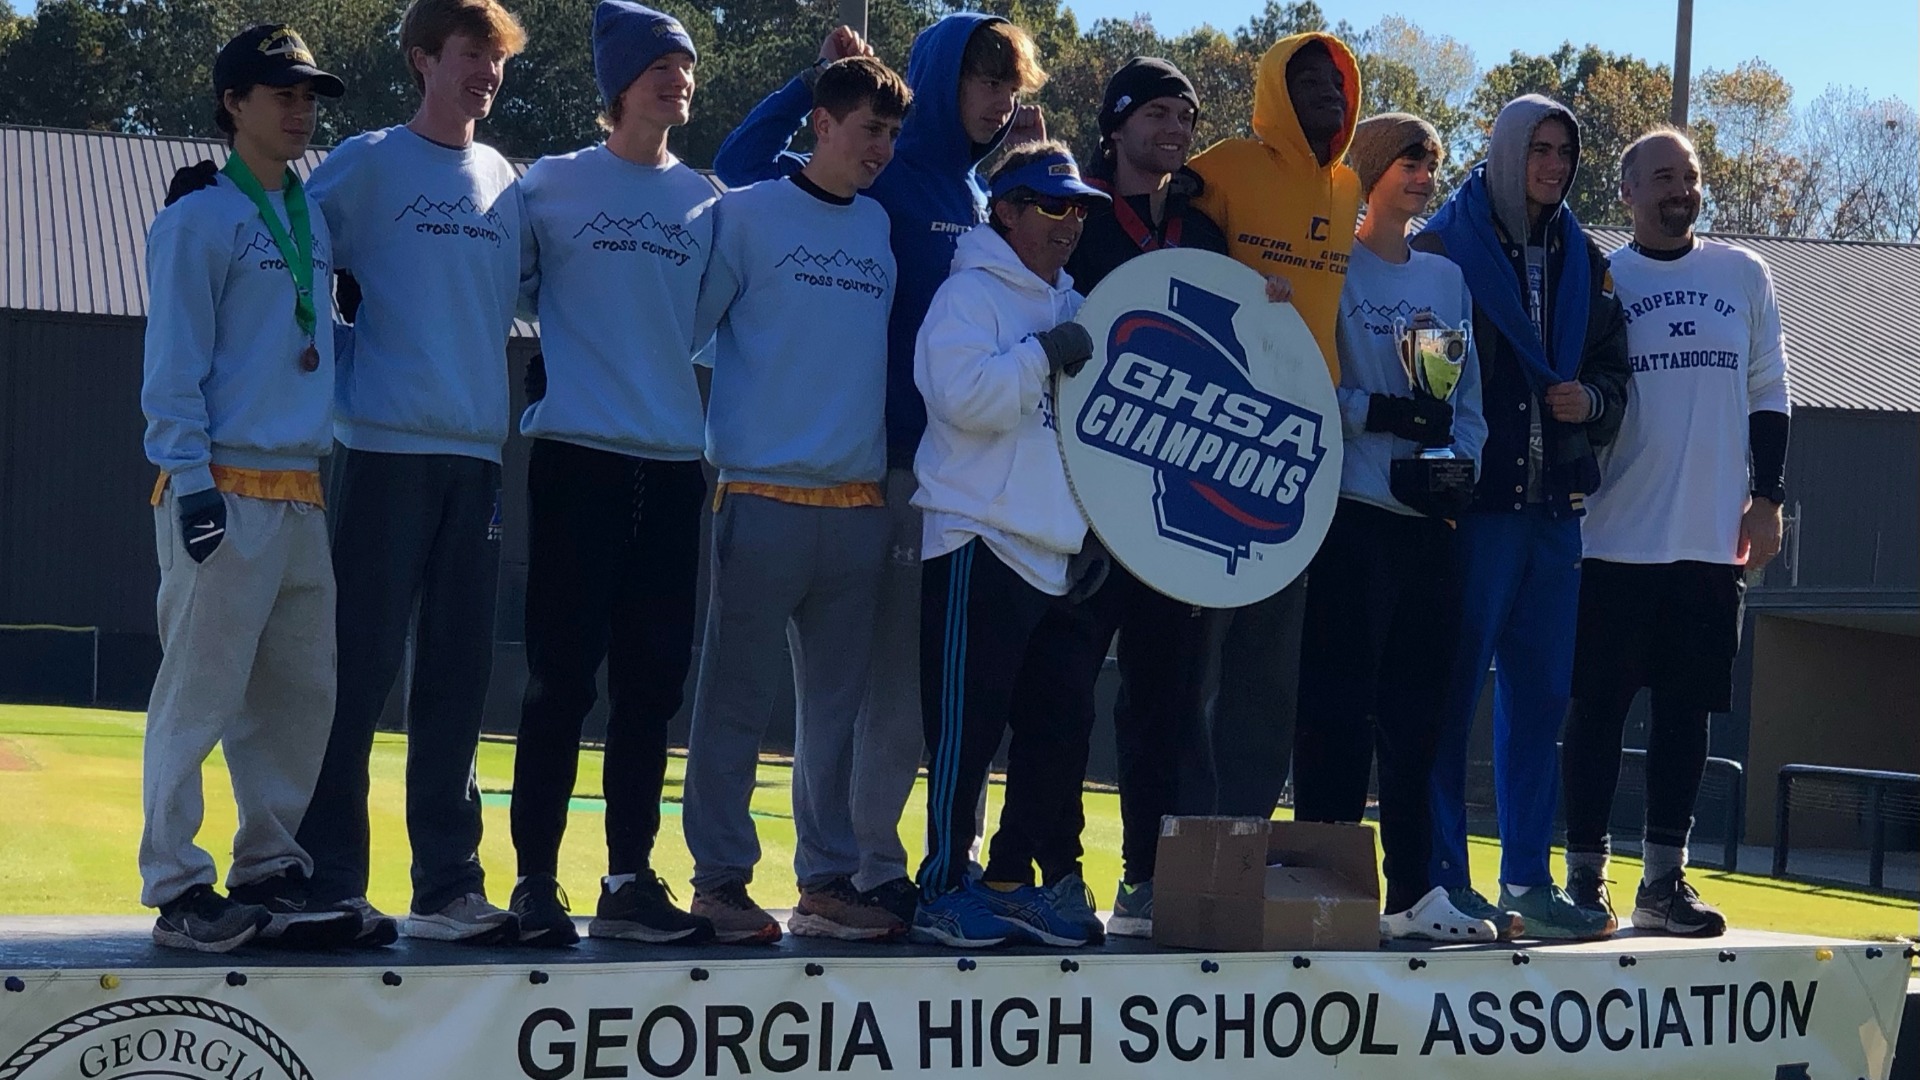 Slide 4 - GHSA 5A - Boys Cross Country - Boys Cross Country State Champions!